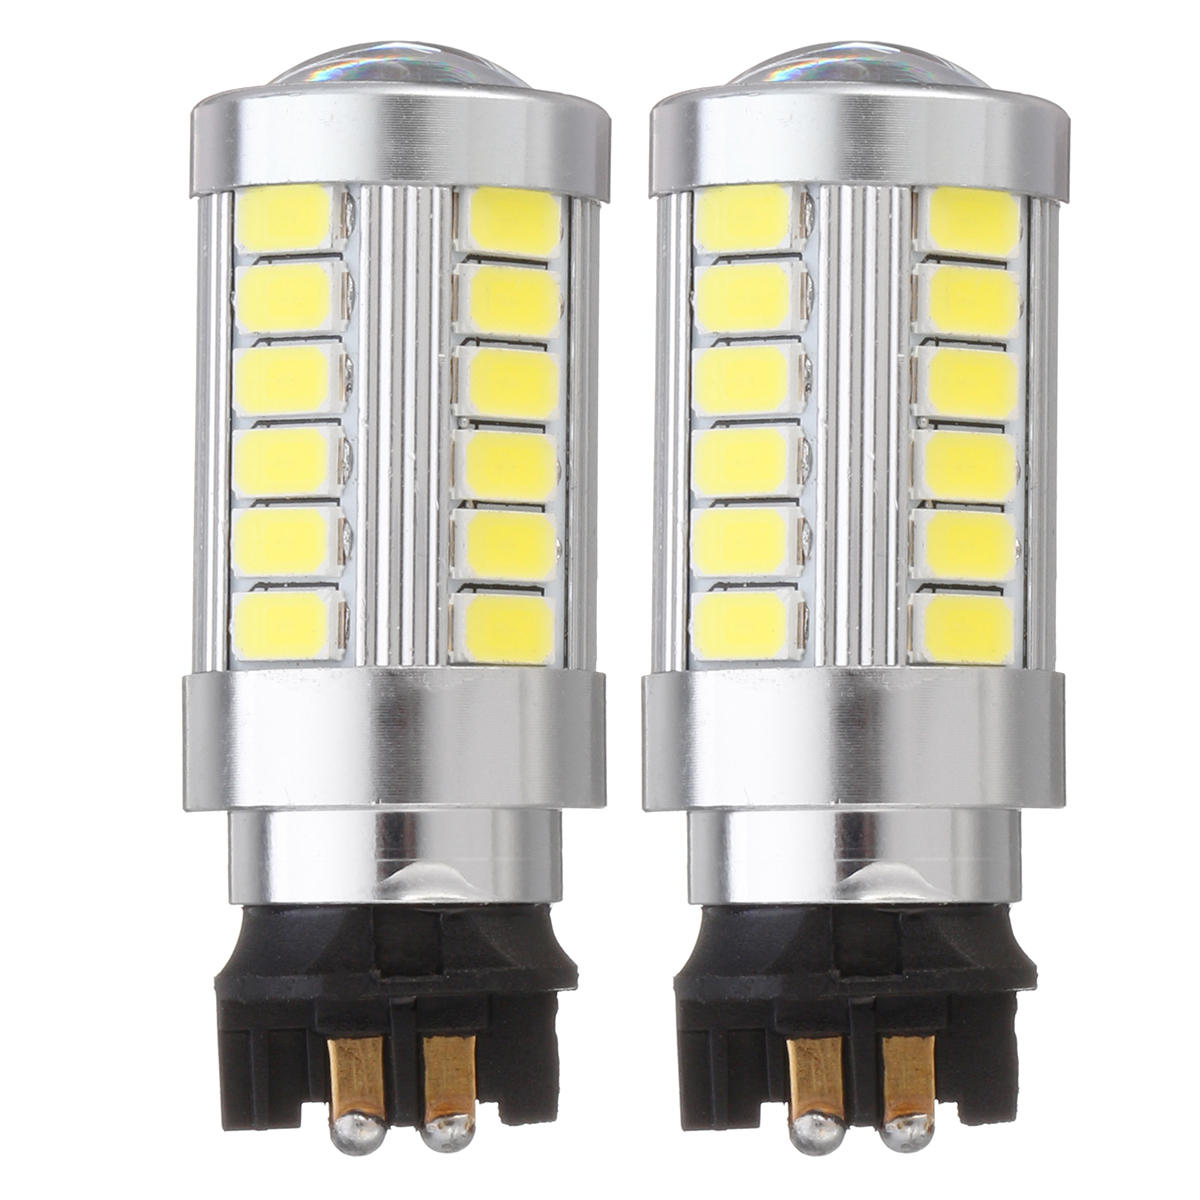 2PCS PW24W 33-SMD LED DRL Daytime Running Lights Replacement Fog Bulbs with Lens 12V 6500K White